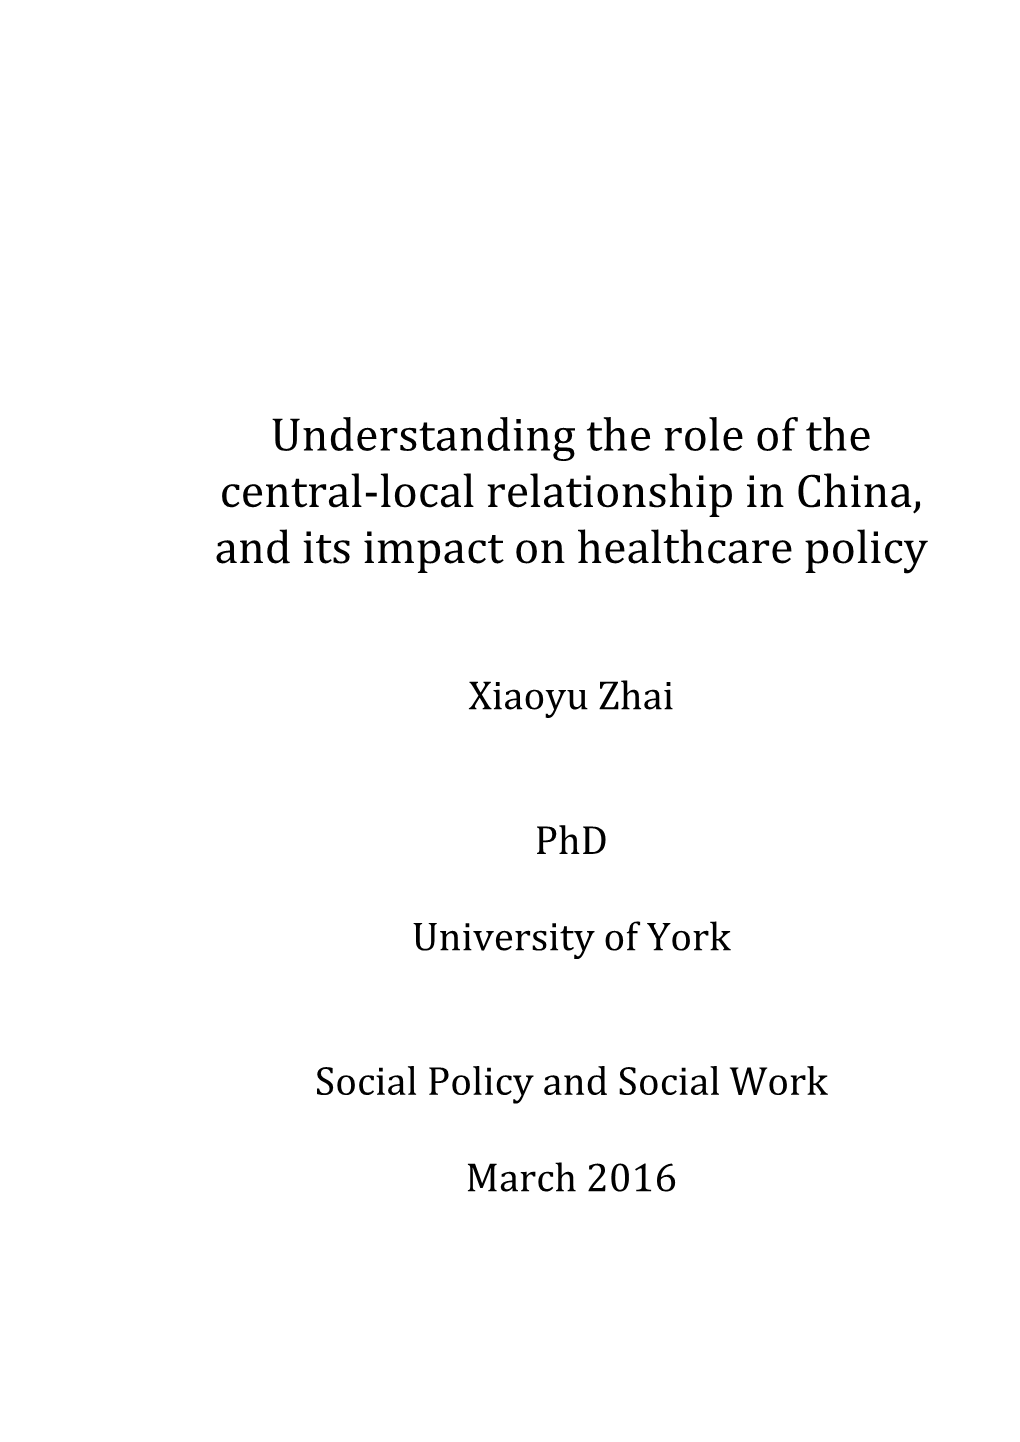 Understanding the Role of the Central-Local Relationship in China, and Its Impact on Healthcare Policy